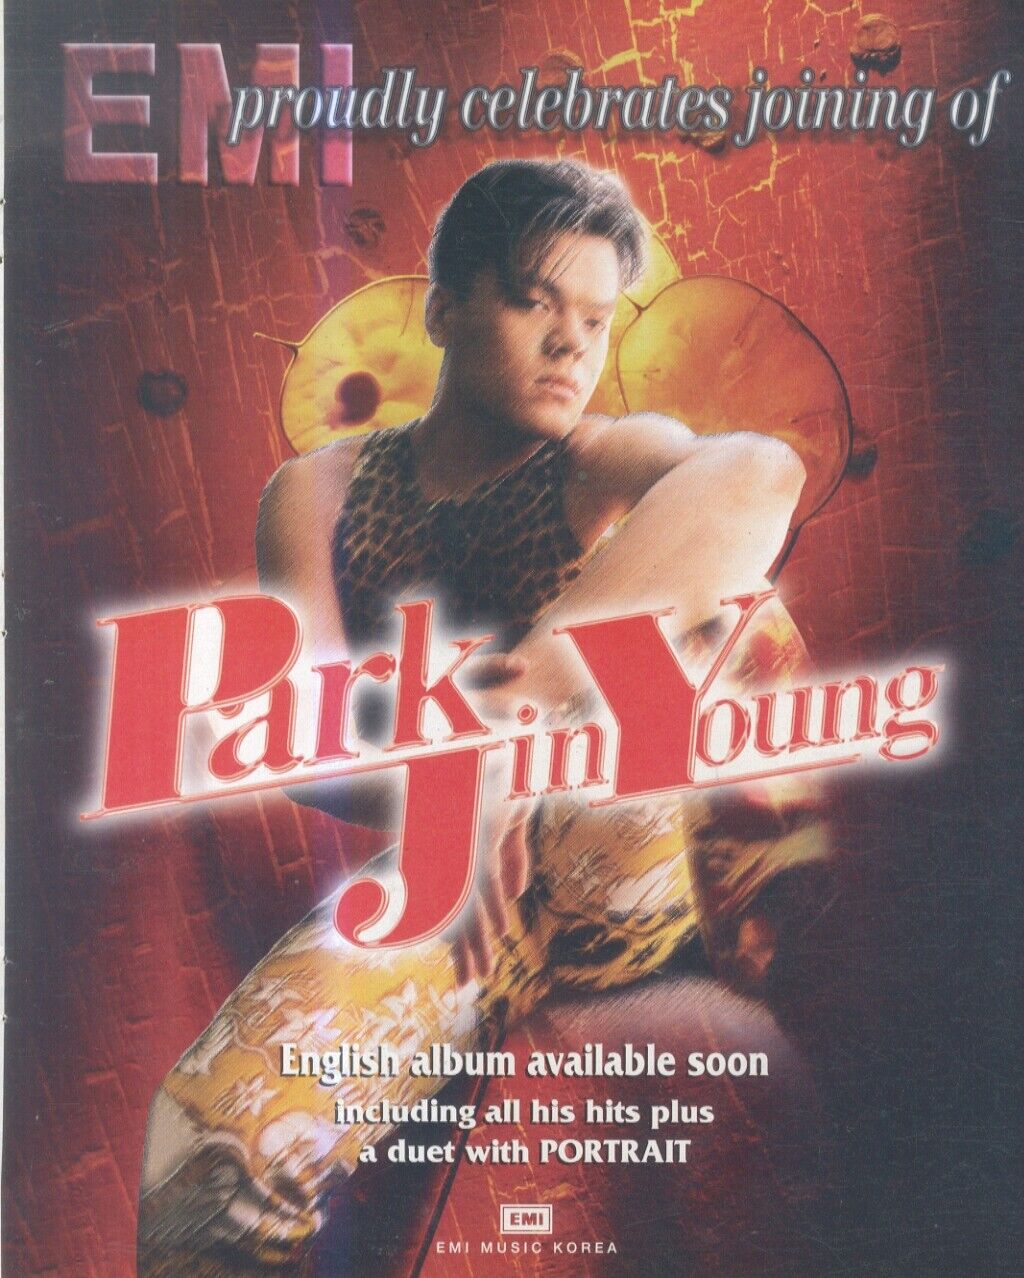 HFBK39 PICTURE/ADVERT 13X11 PARK JIN YOUNG